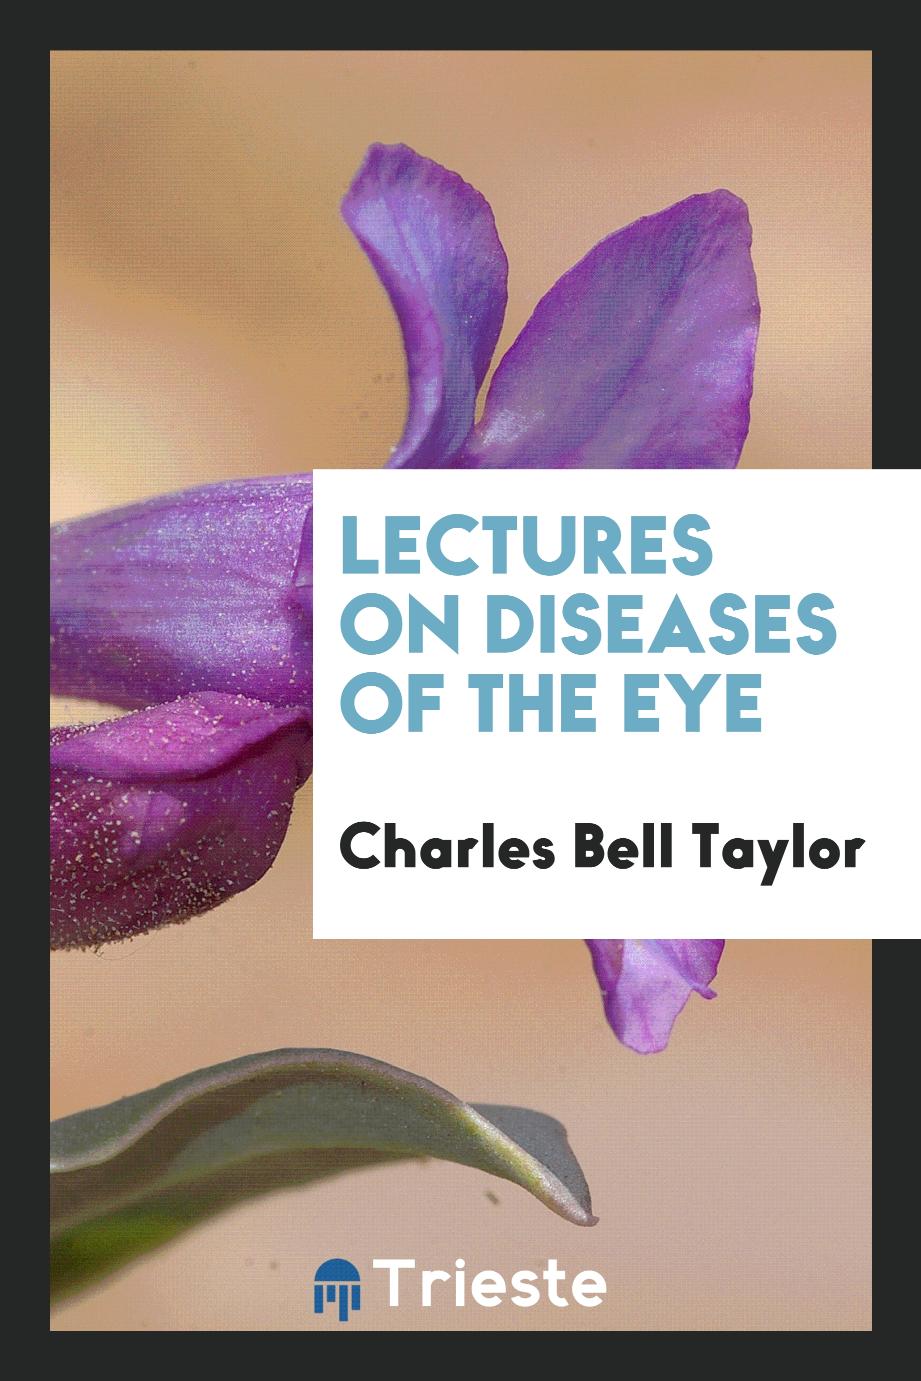 Lectures on Diseases of the Eye